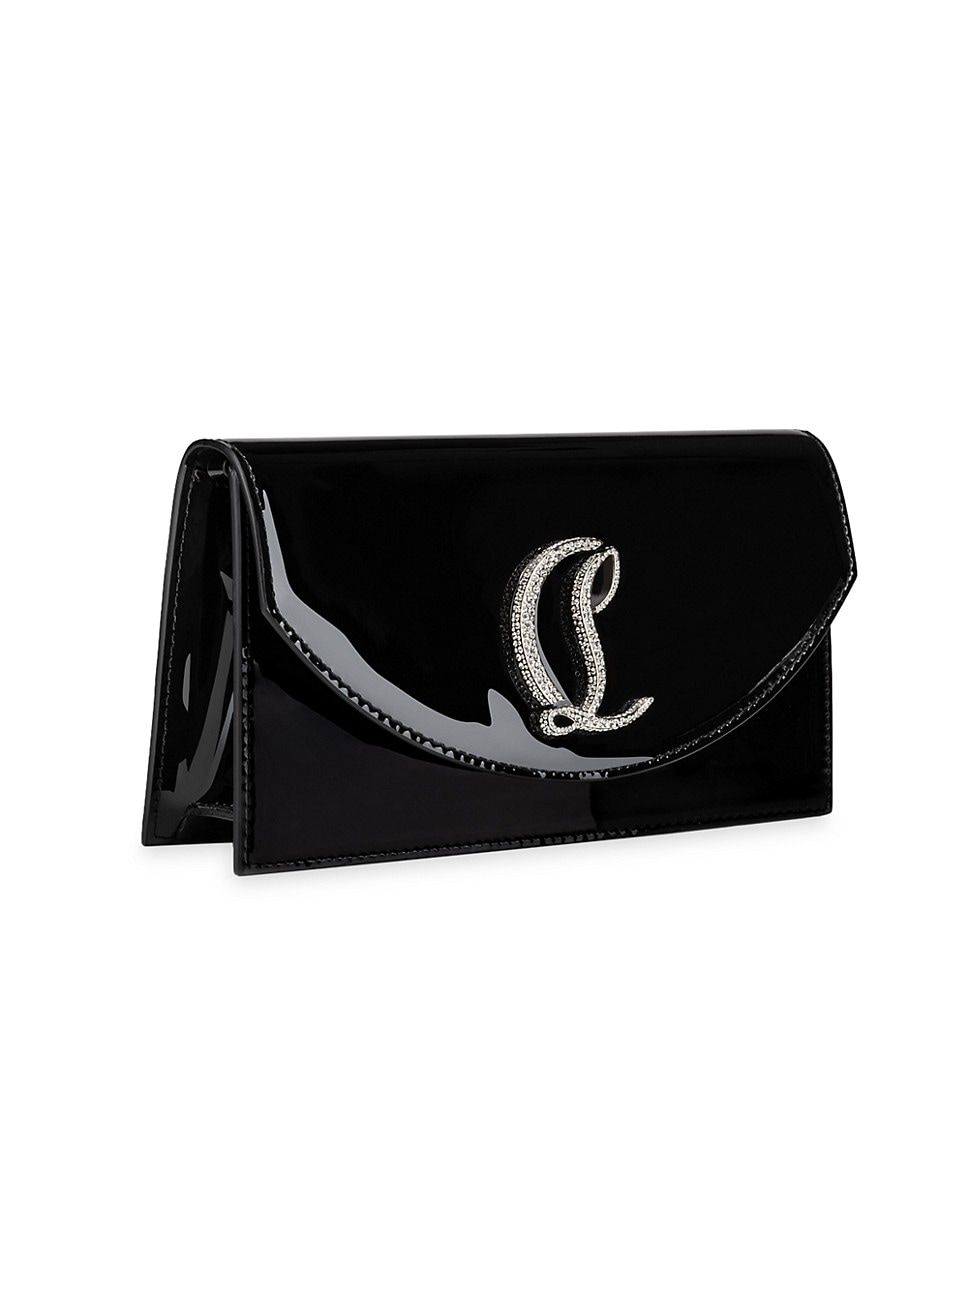 Loubi54 Patent Leather Clutch-On-Chain | Saks Fifth Avenue